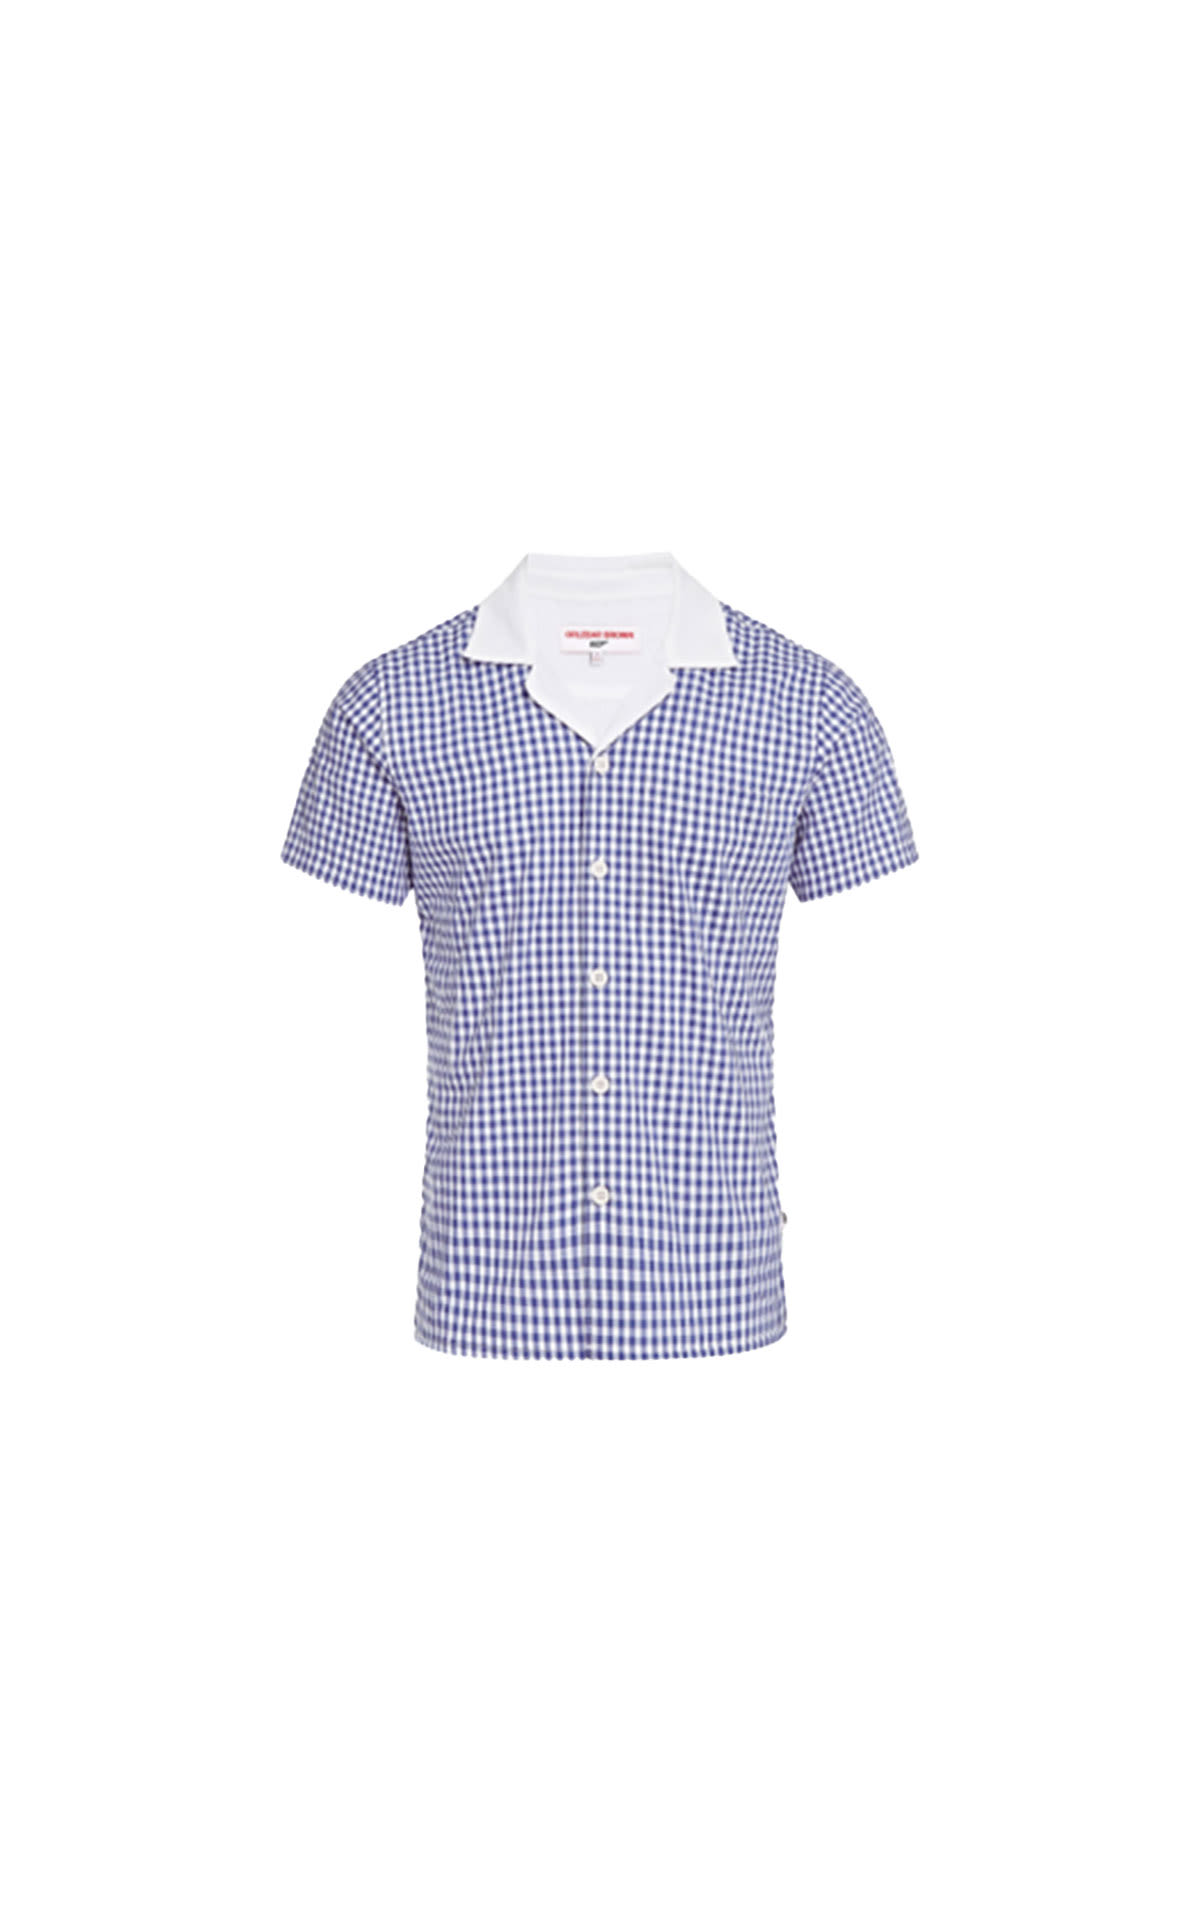 Orlebar Brown Thunderball gingham from Bicester Village